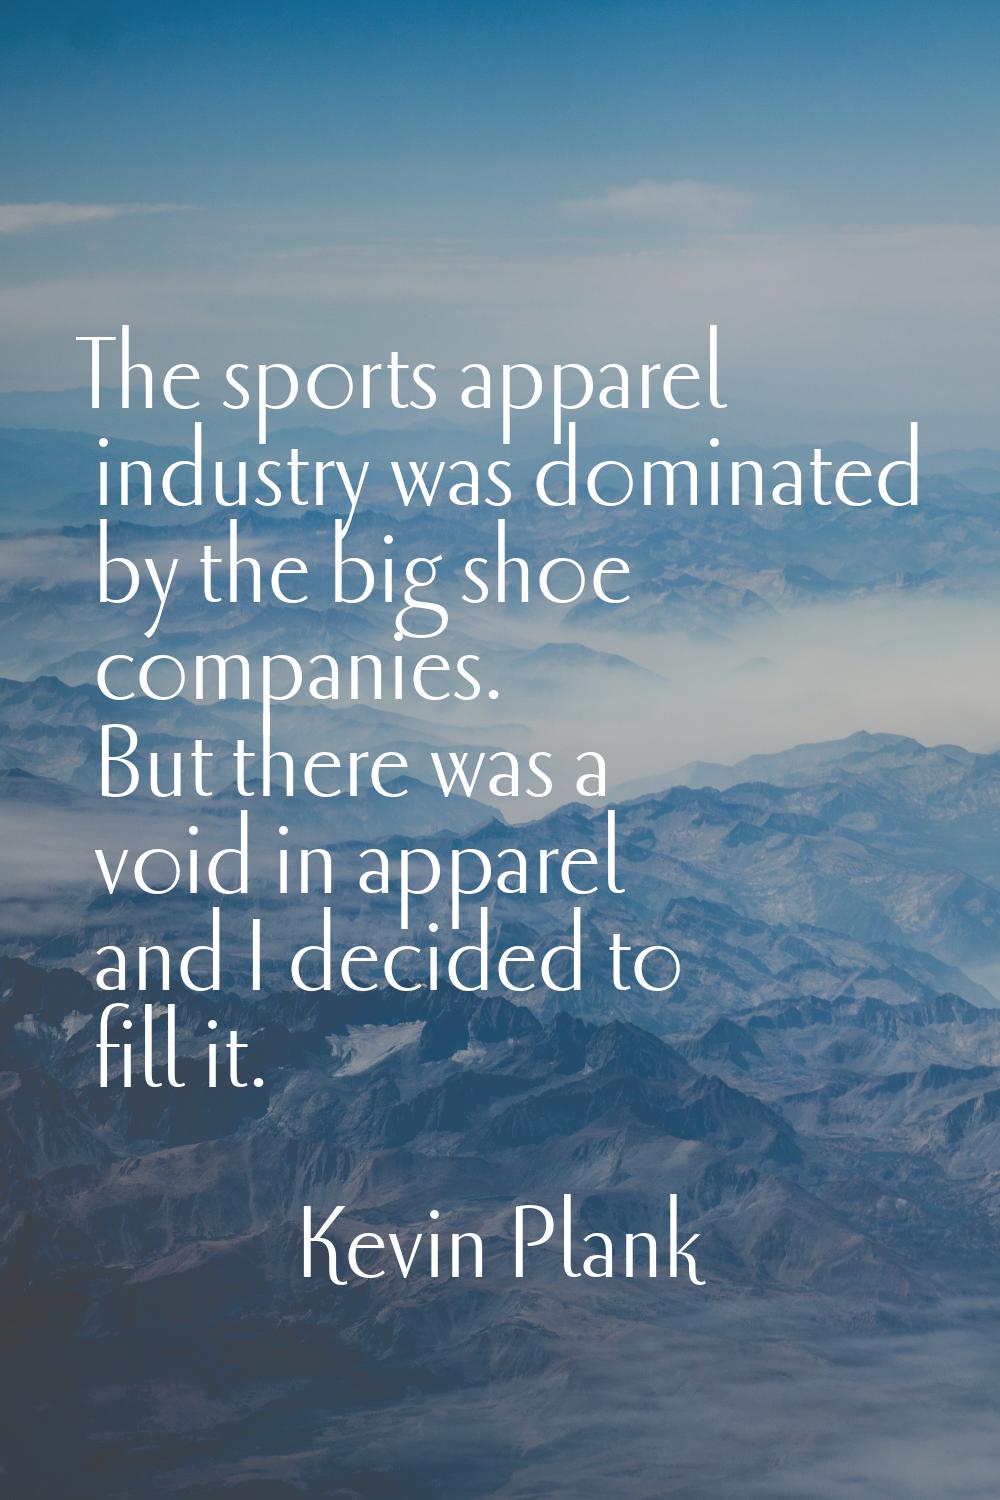 The sports apparel industry was dominated by the big shoe companies. But there was a void in appare